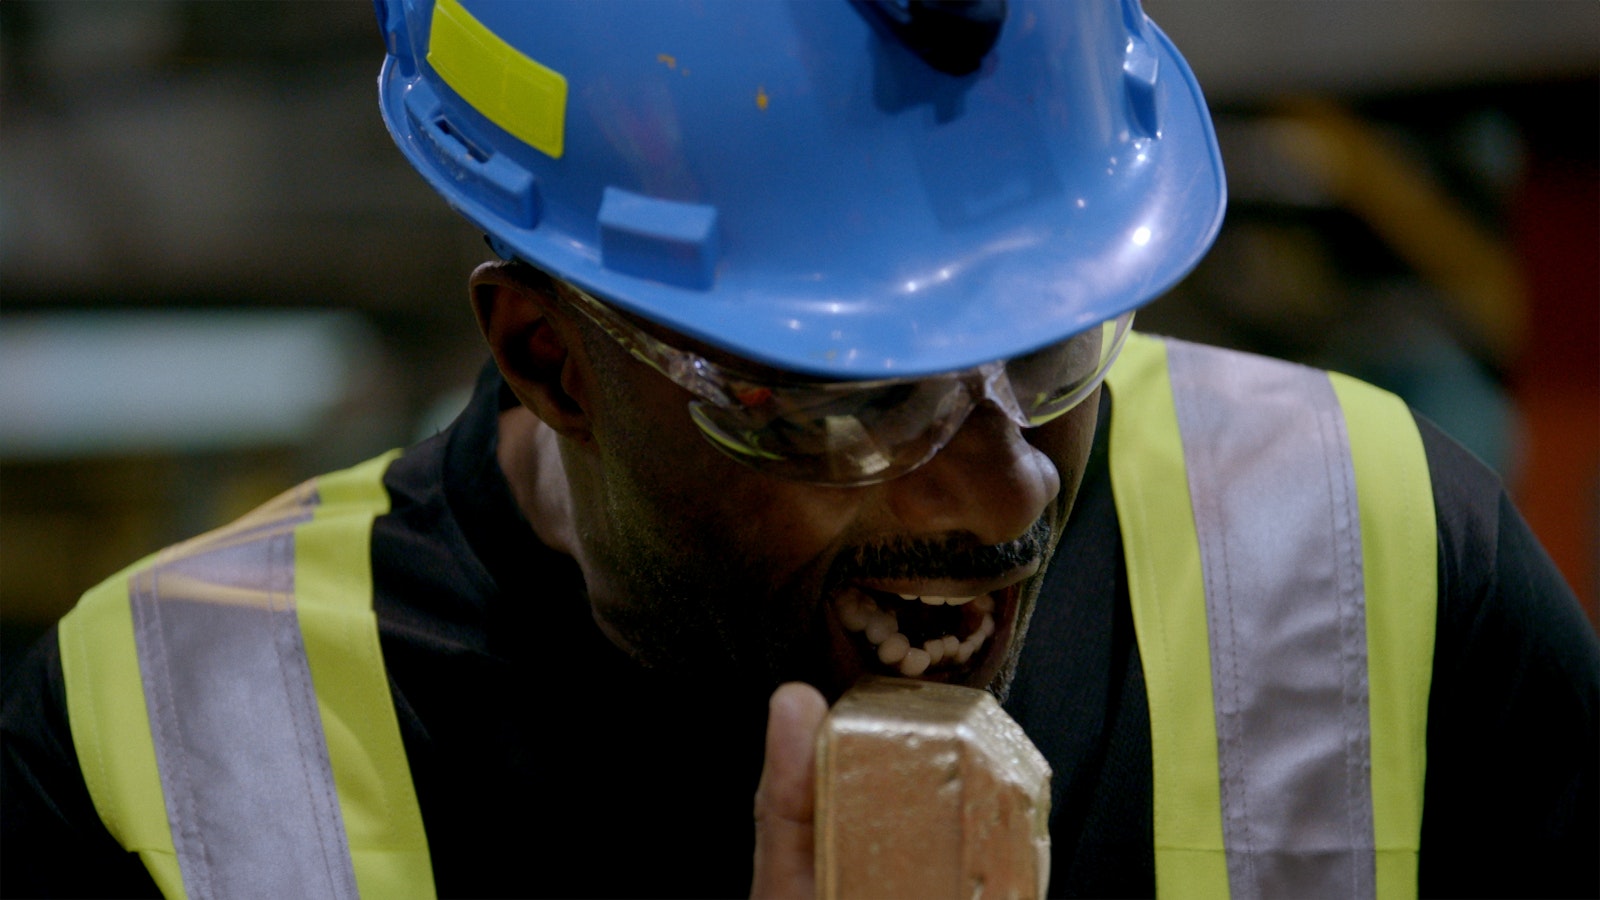 Wearing a blue safety hat and yellow jacket, Idris Elba holds up a large gold bar and pretends to bite into it.